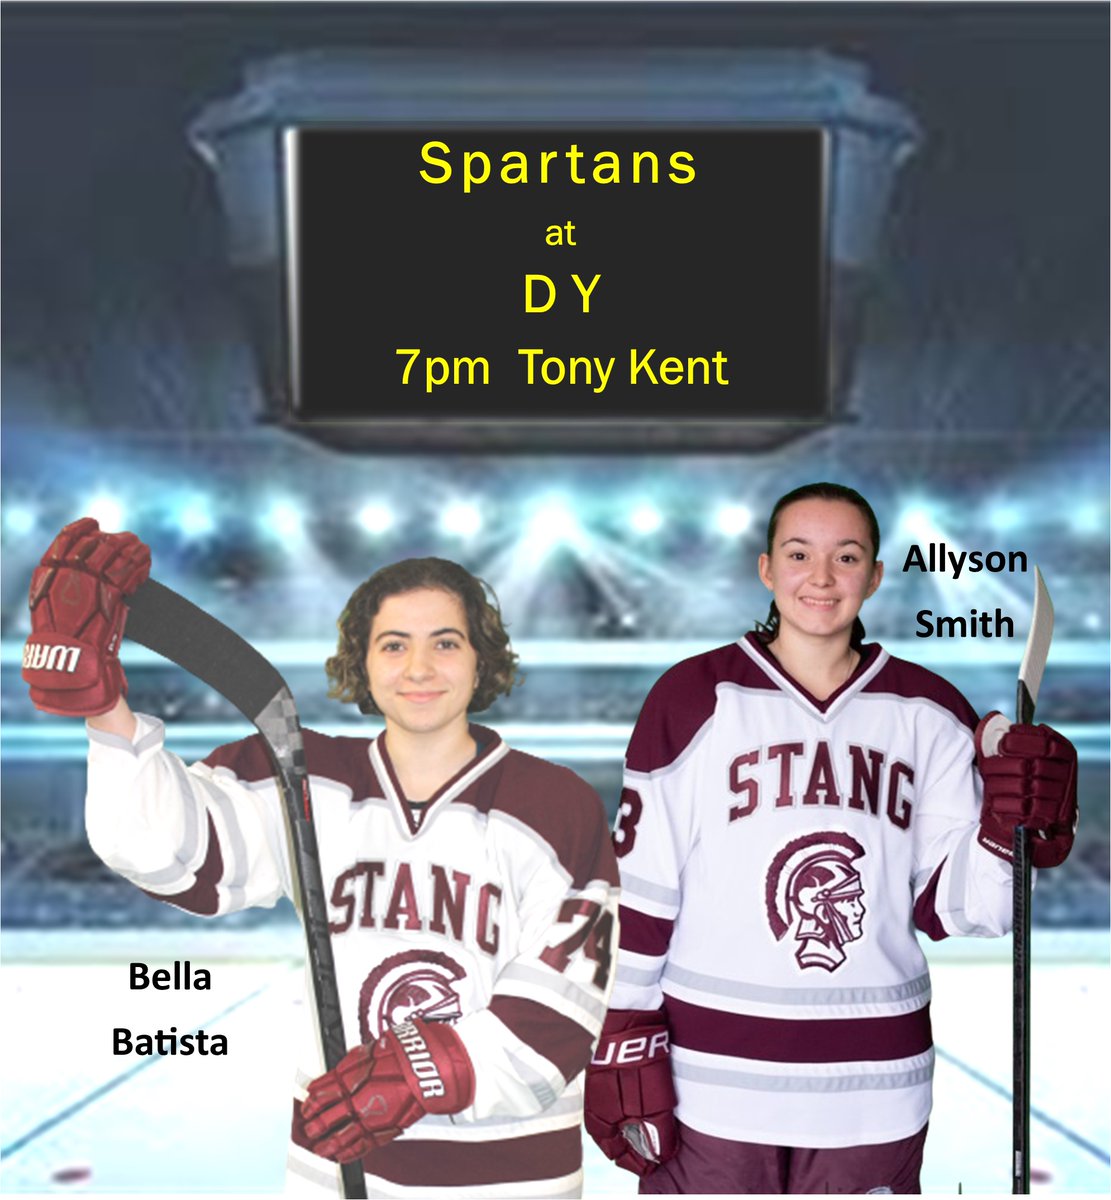 Girls travel to take on DY today.
Puck drop is 7pm at Tony Kent Arena. #GoSpartans #weculture @SC_Varsity @In_The_Slot @GlobeSchools @HNNowSports @MHL_Scoreboard @MassHSHockey @HNIBonline @BishopStangAD